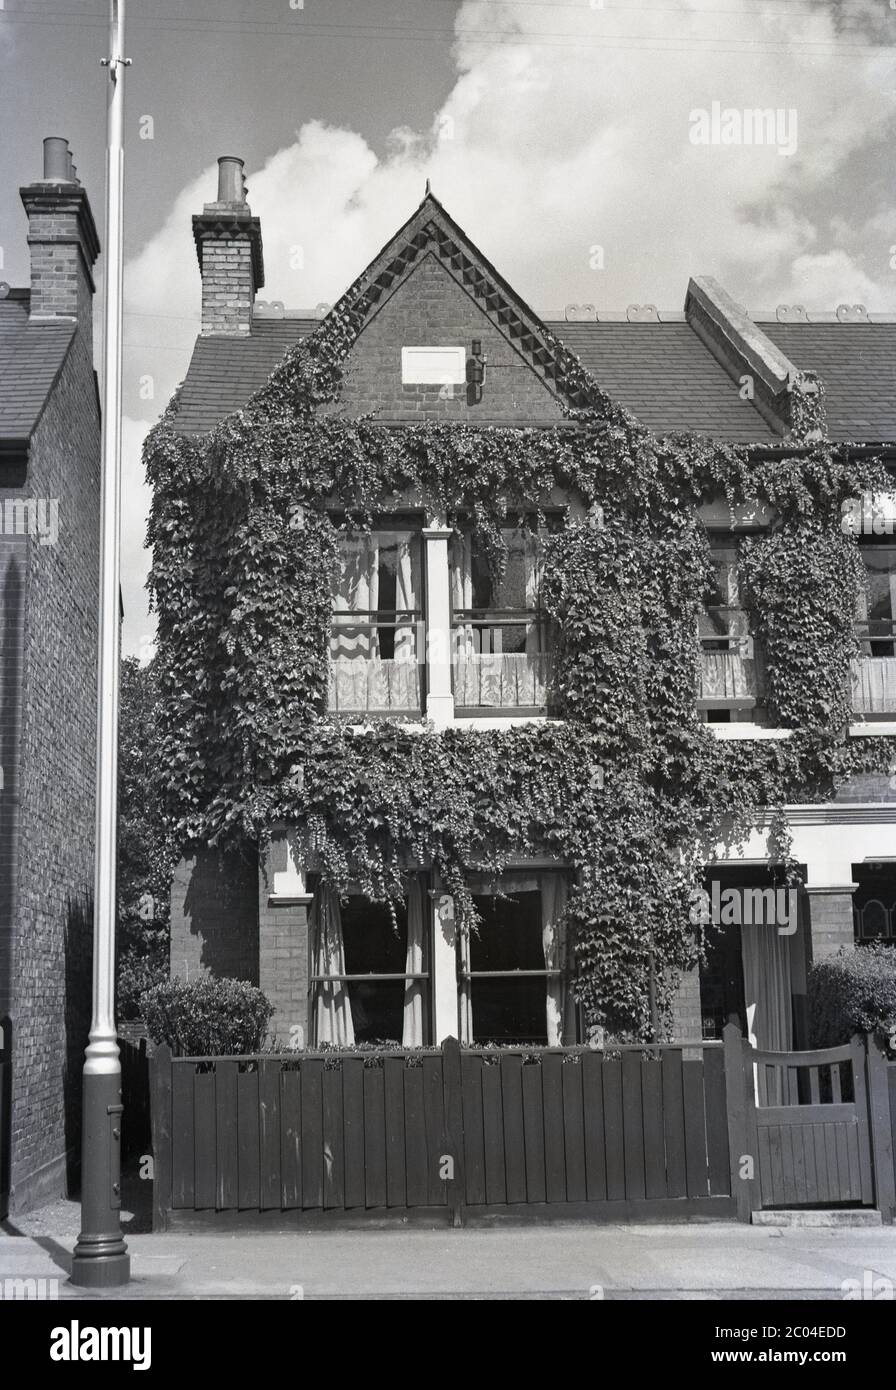 1940s, historical, exterior view of a traditional and large victorian two-storey terraced suburban house with sash windows, front wooden fence and gate and extensive ivy foliage, Sheffield, England, UK. Also seen is a curtain over the open front porch, a common addition in this formal era. Stock Photo